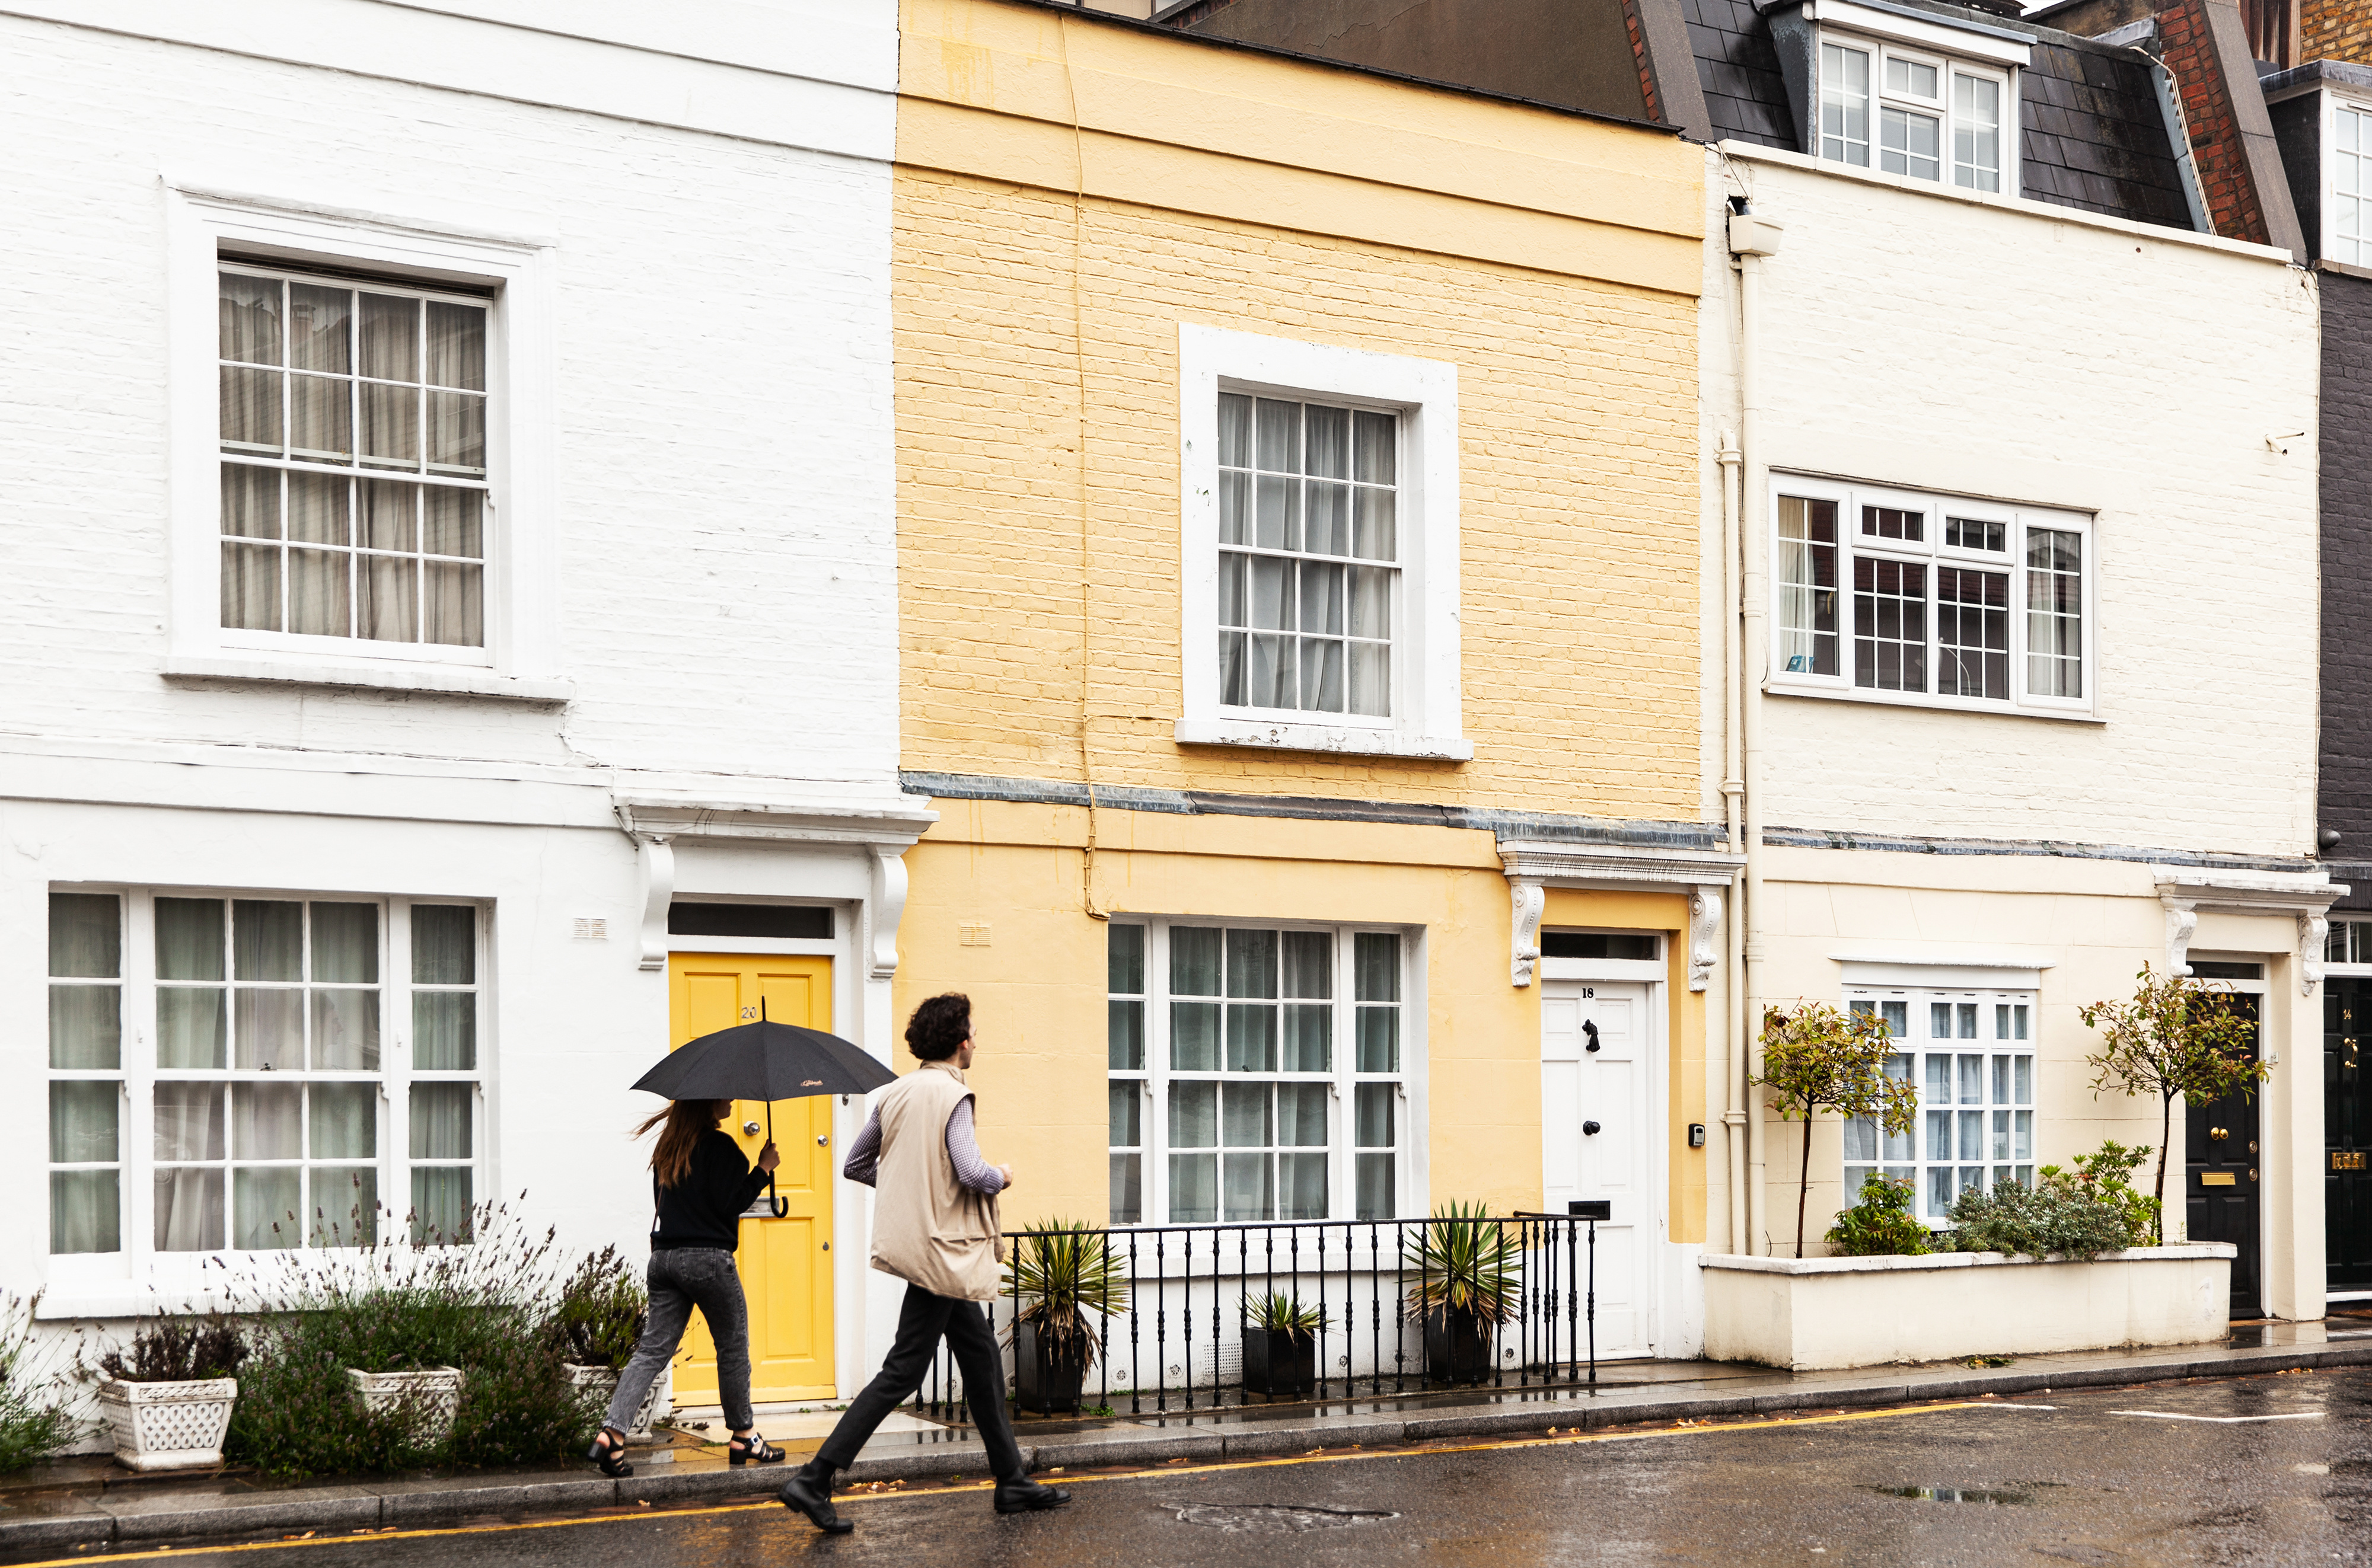 walking people on the street with colorful houses in the UK